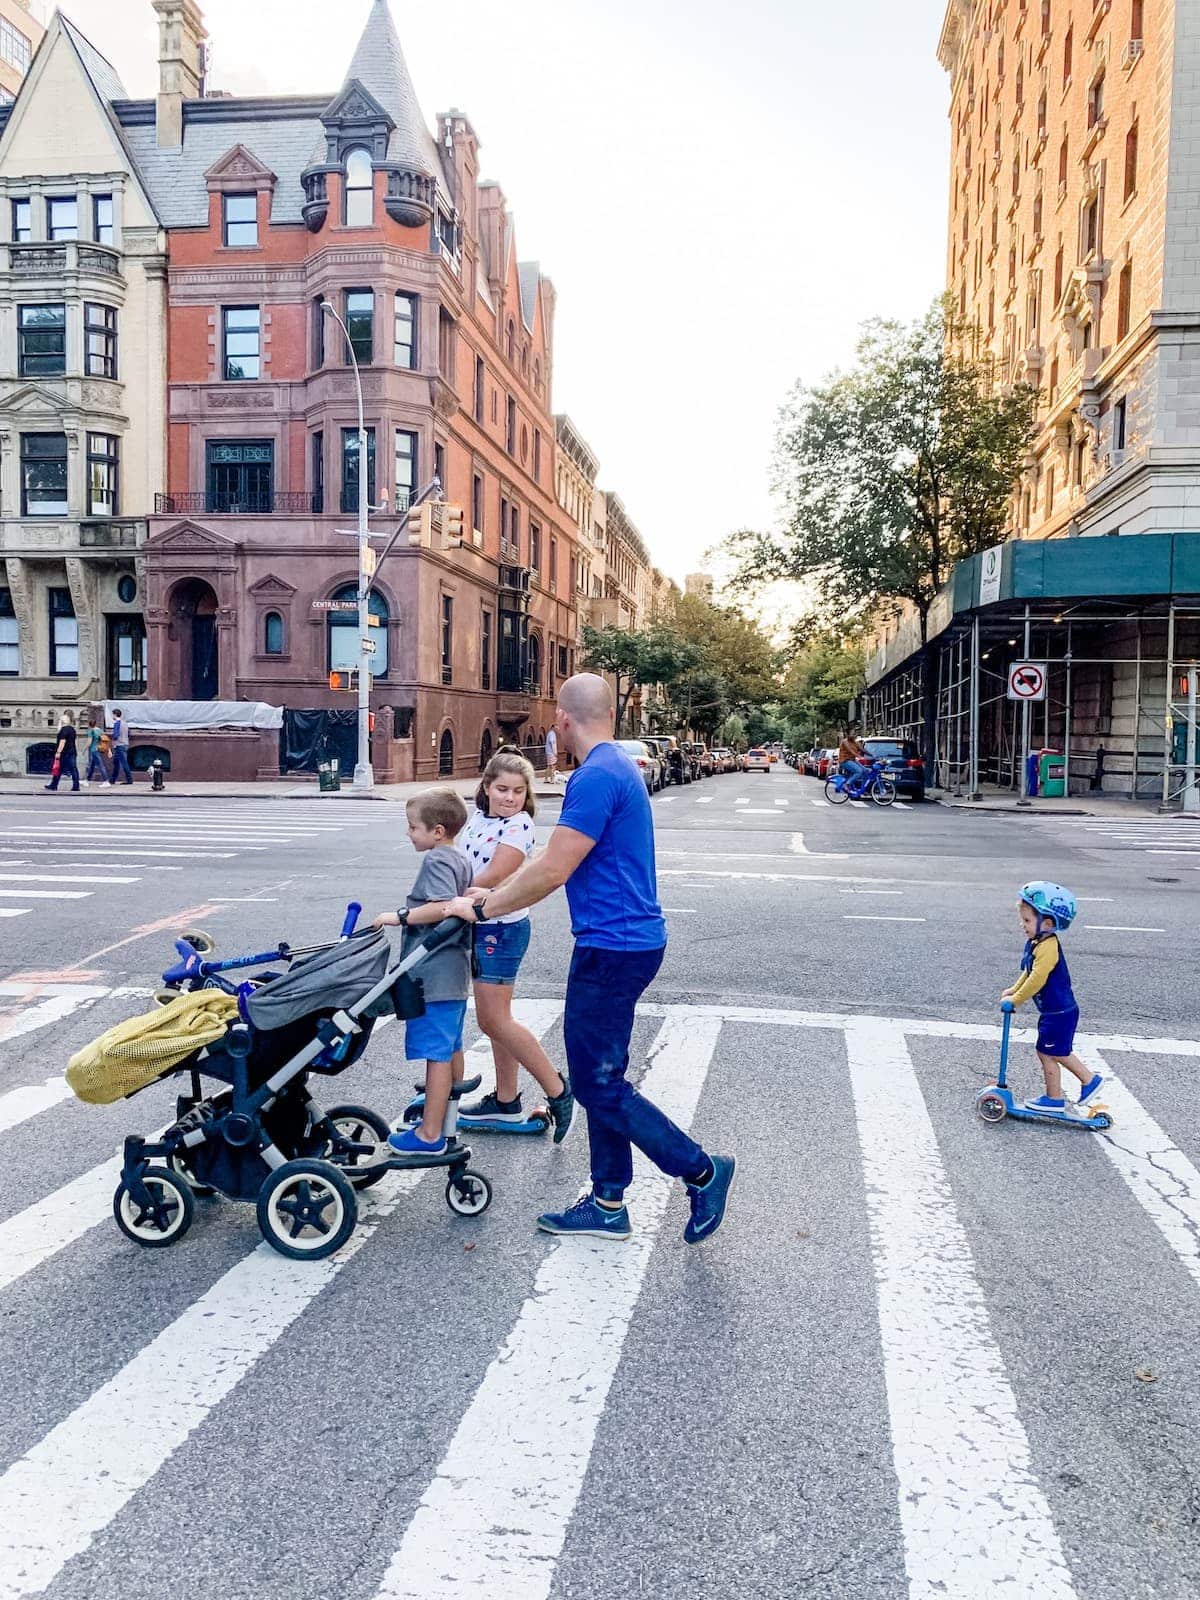 Gordon and the kids crossing the street